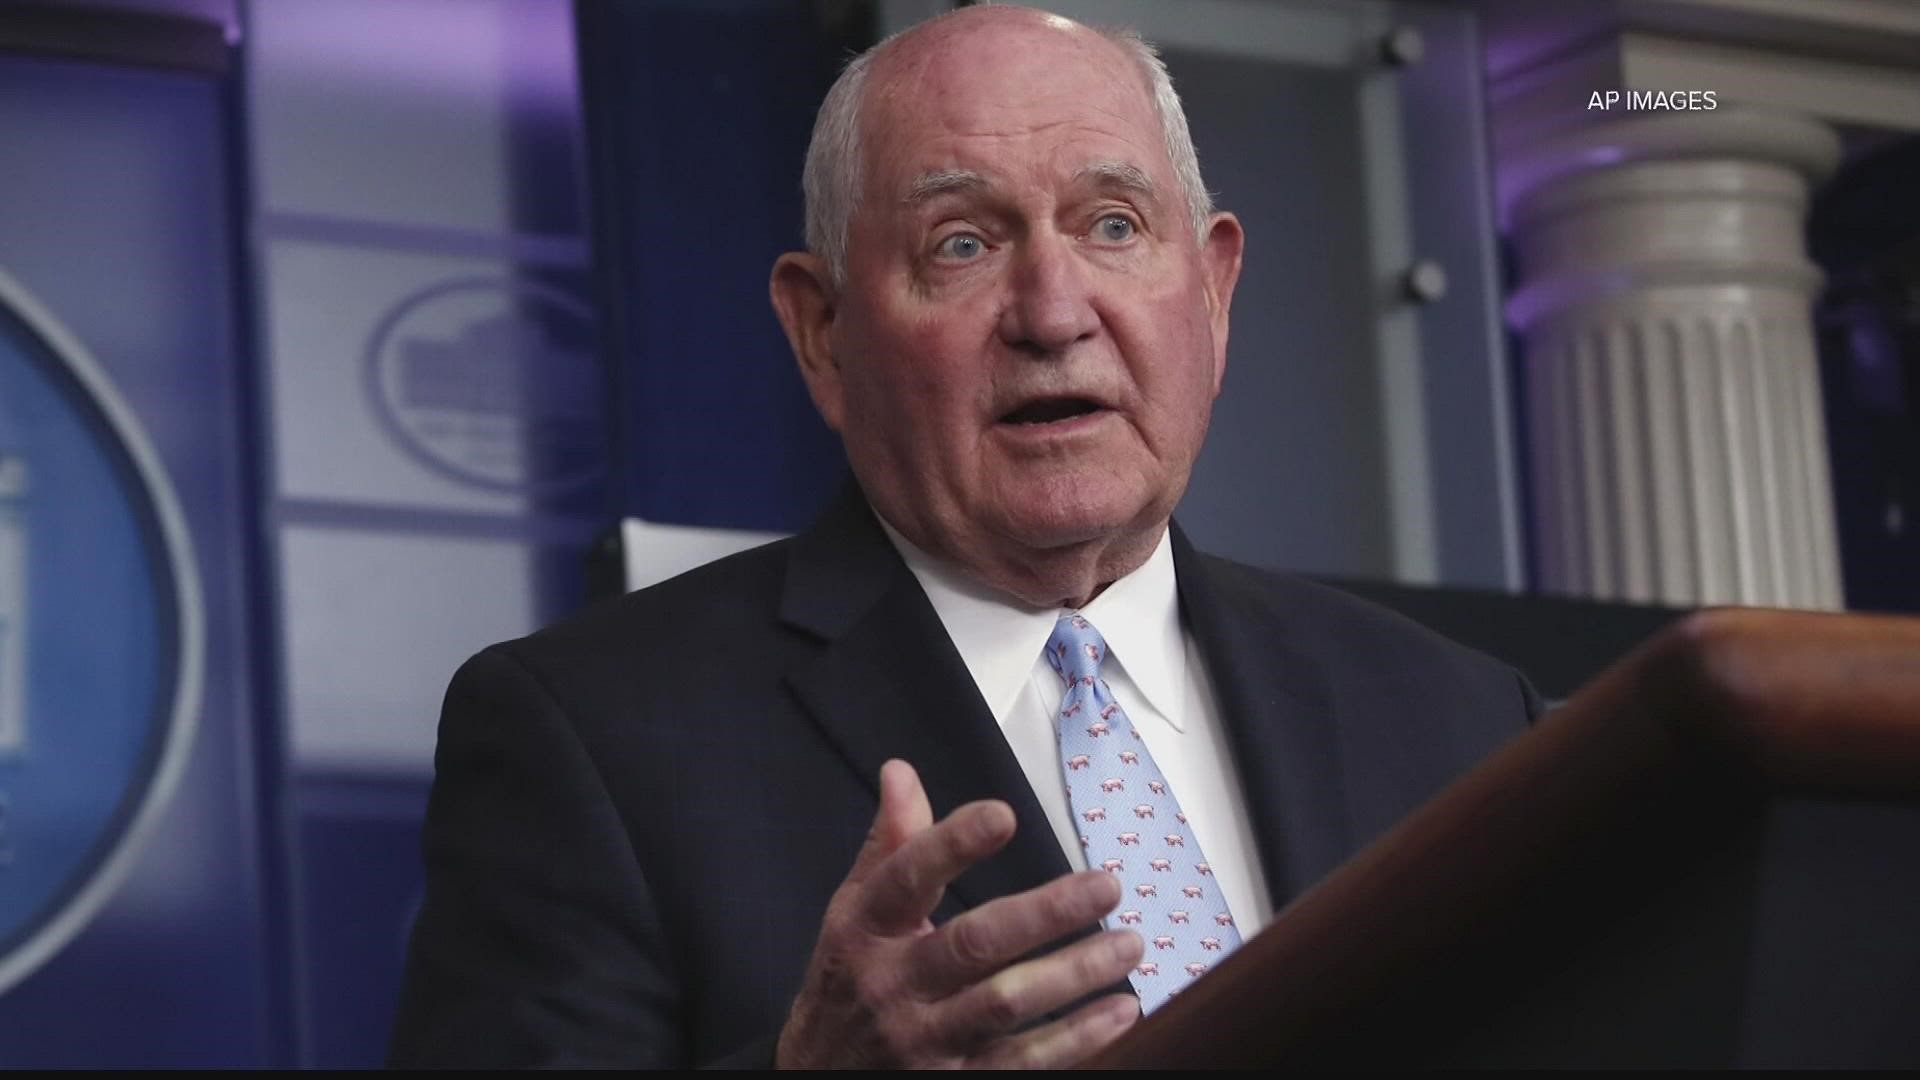 Perdue will be the 14th person to lead USG.